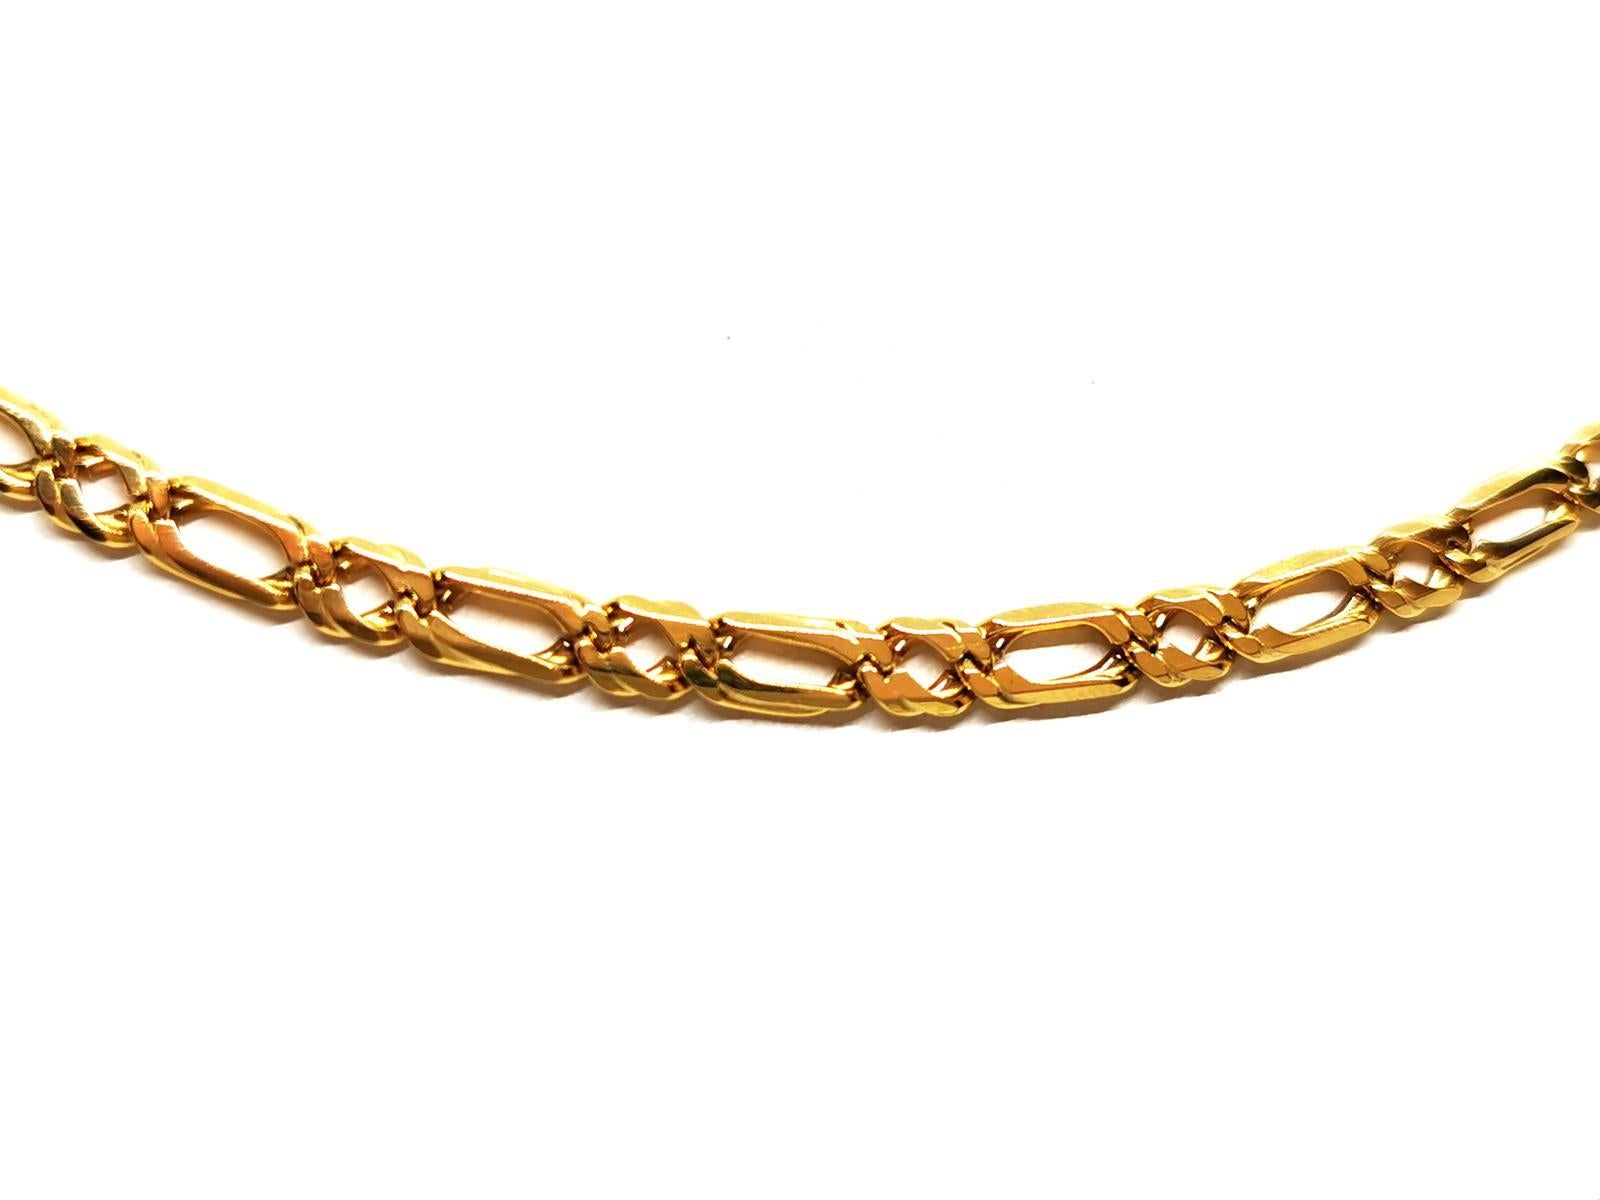 Necklace chain in yellow gold 750 thousandths (18 carats). double alternating mesh. length: 56 cm. width: 0.35 cm. carabiner clasp. total weight: 17.51 g. eagle head hallmark. excellent condition.
